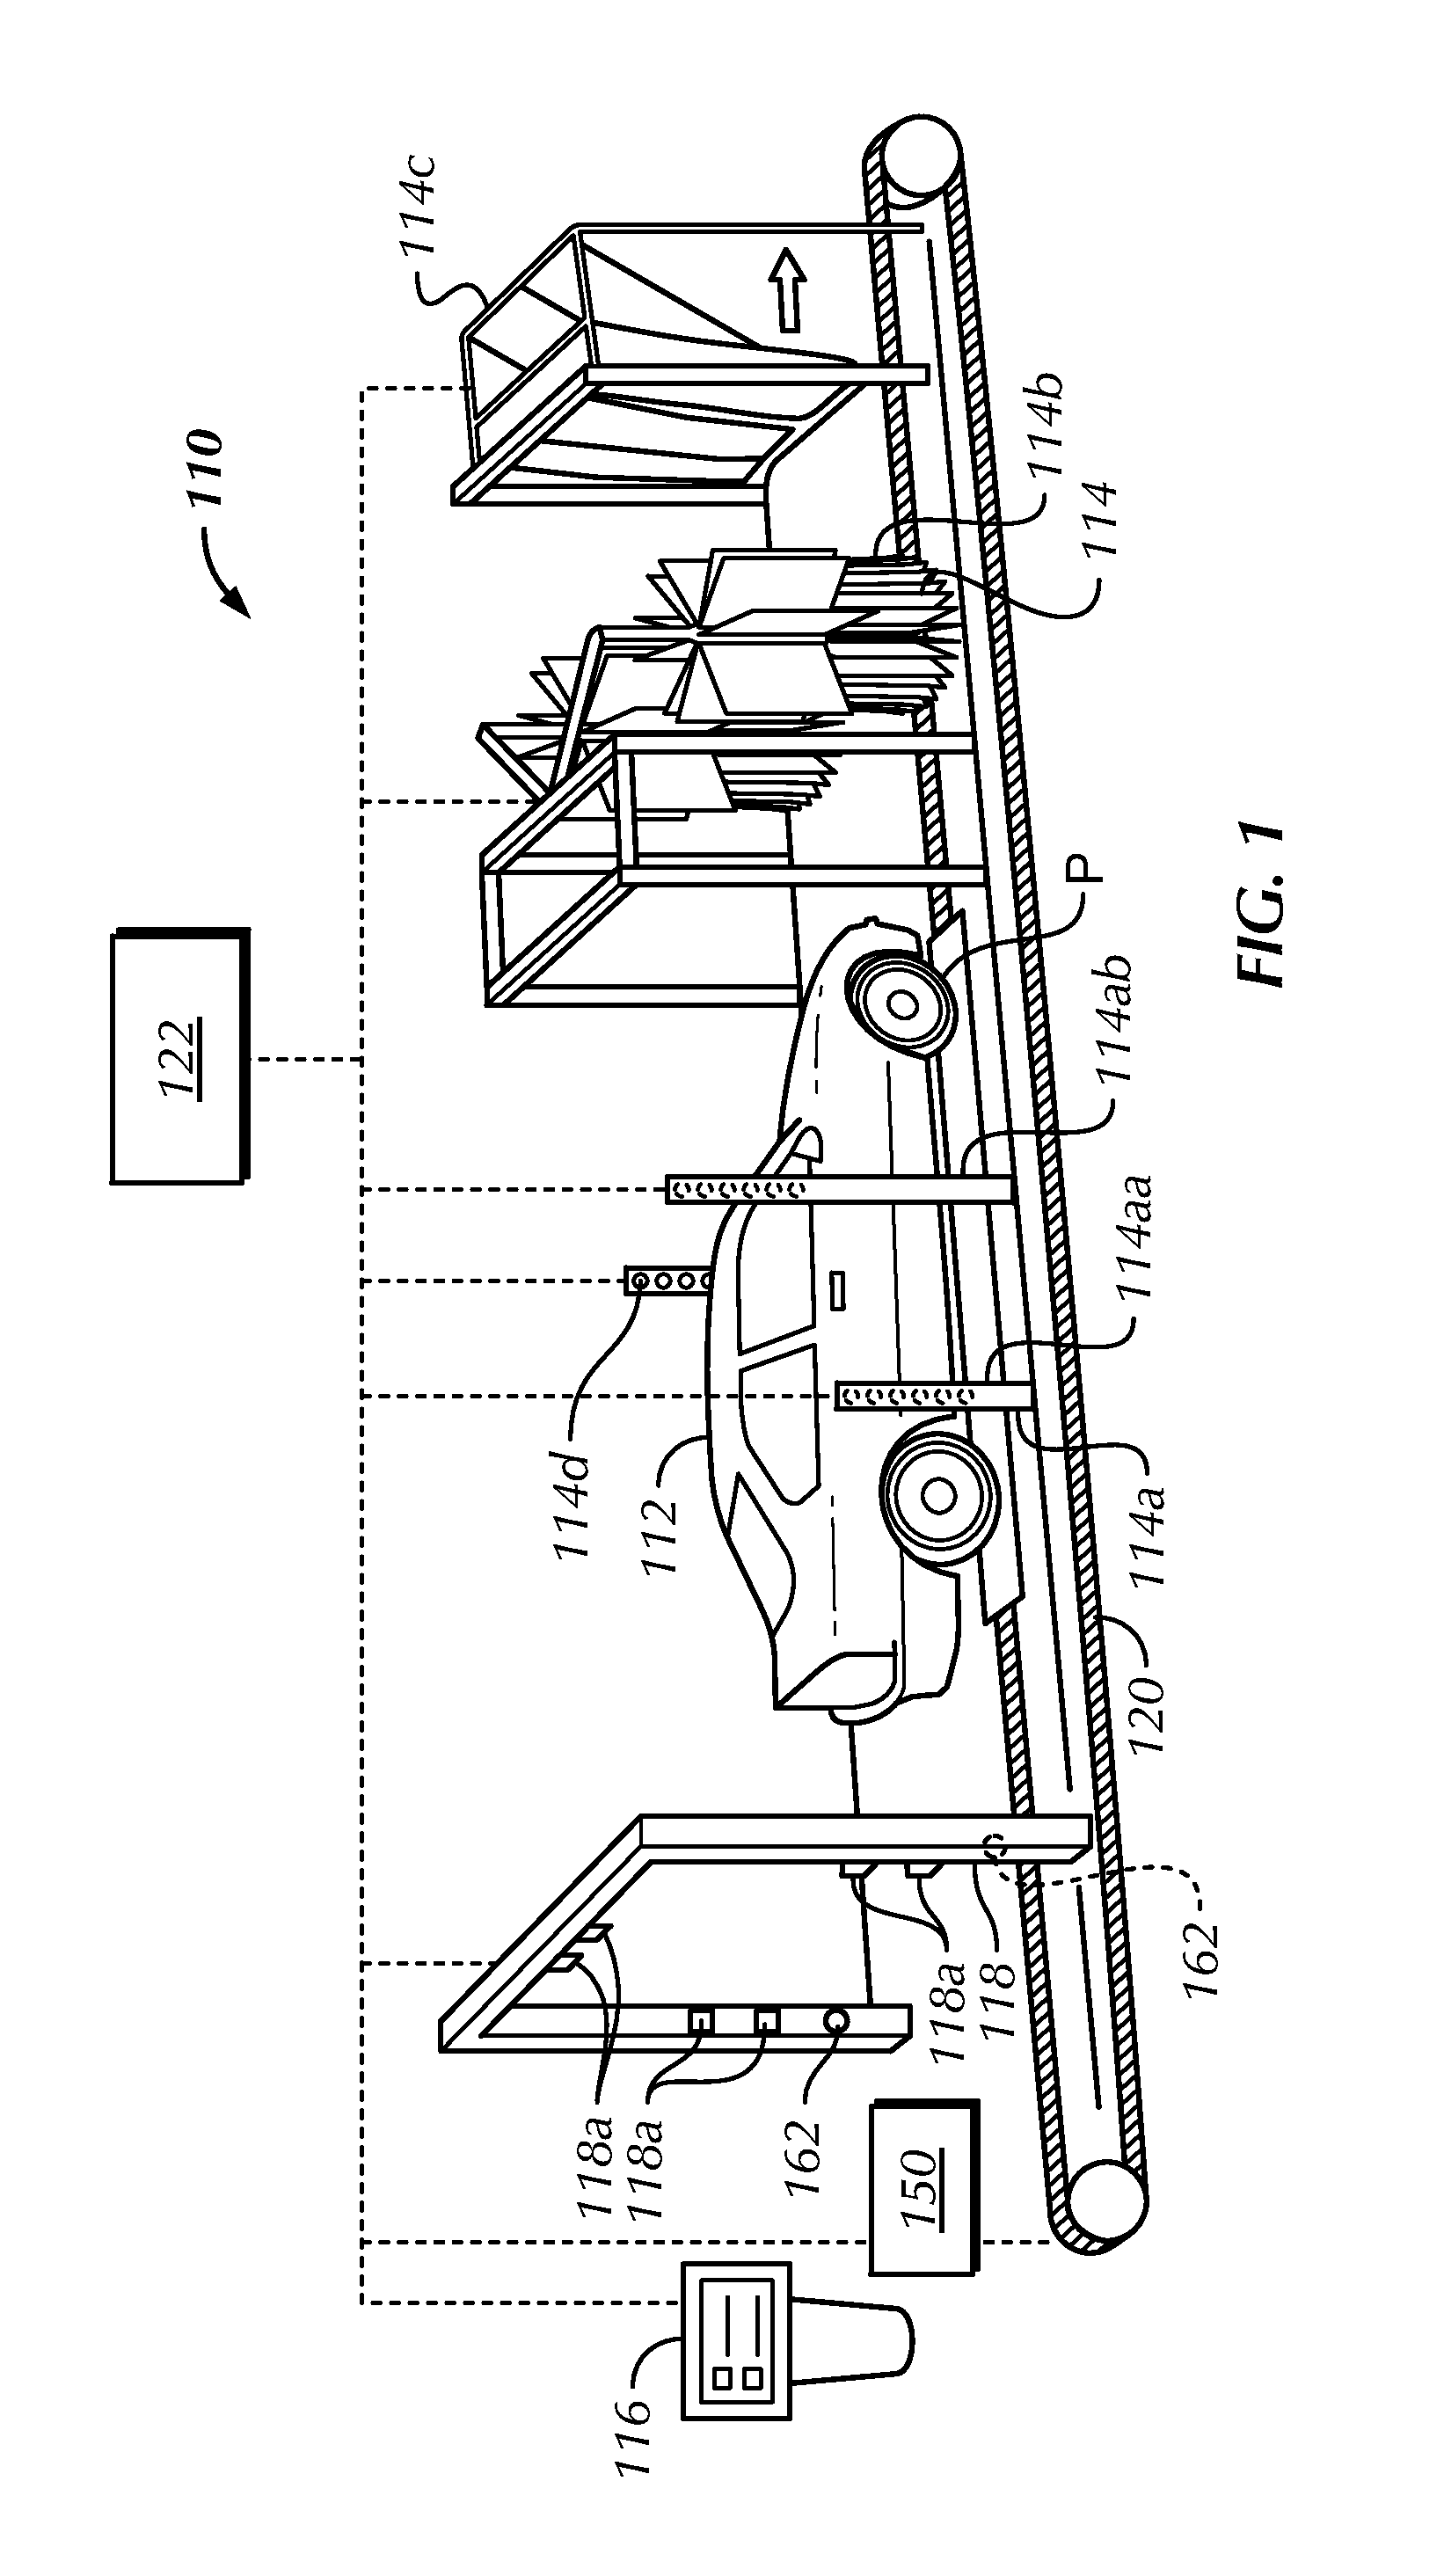 Method and system for washing a vehicle